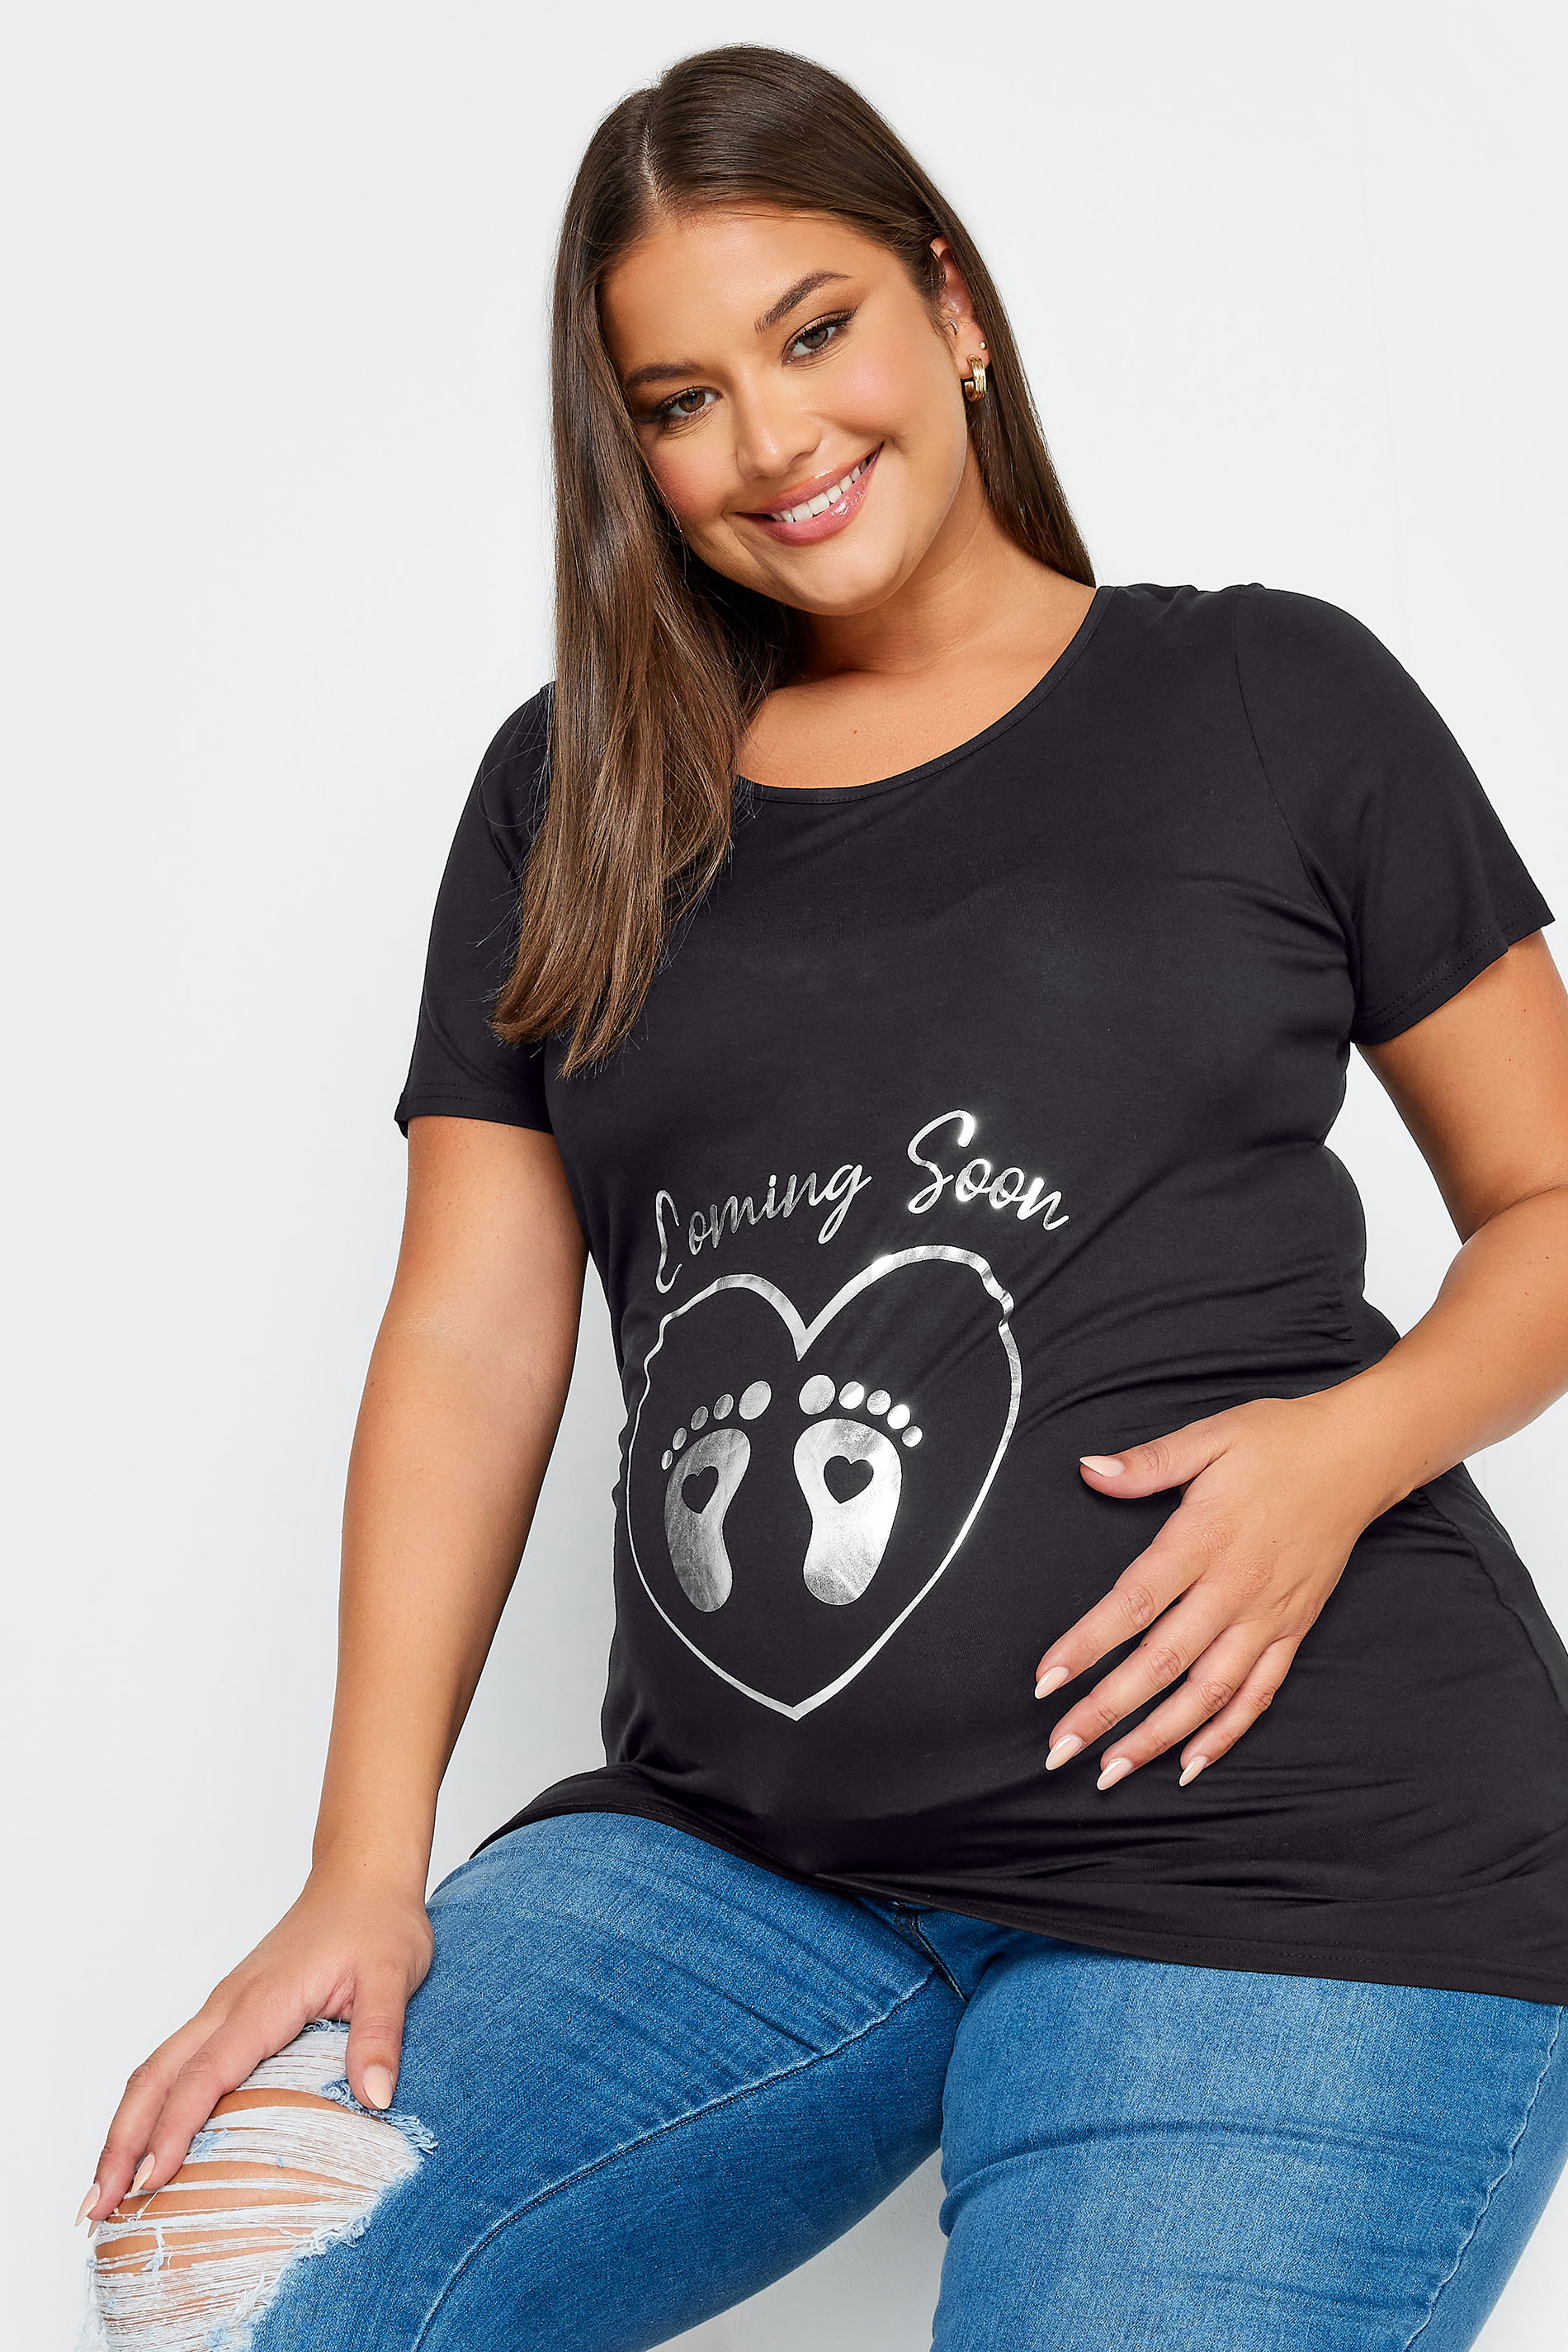 What The Bump Wants The Bump Gets - Maternity Scoop Neck Tee 